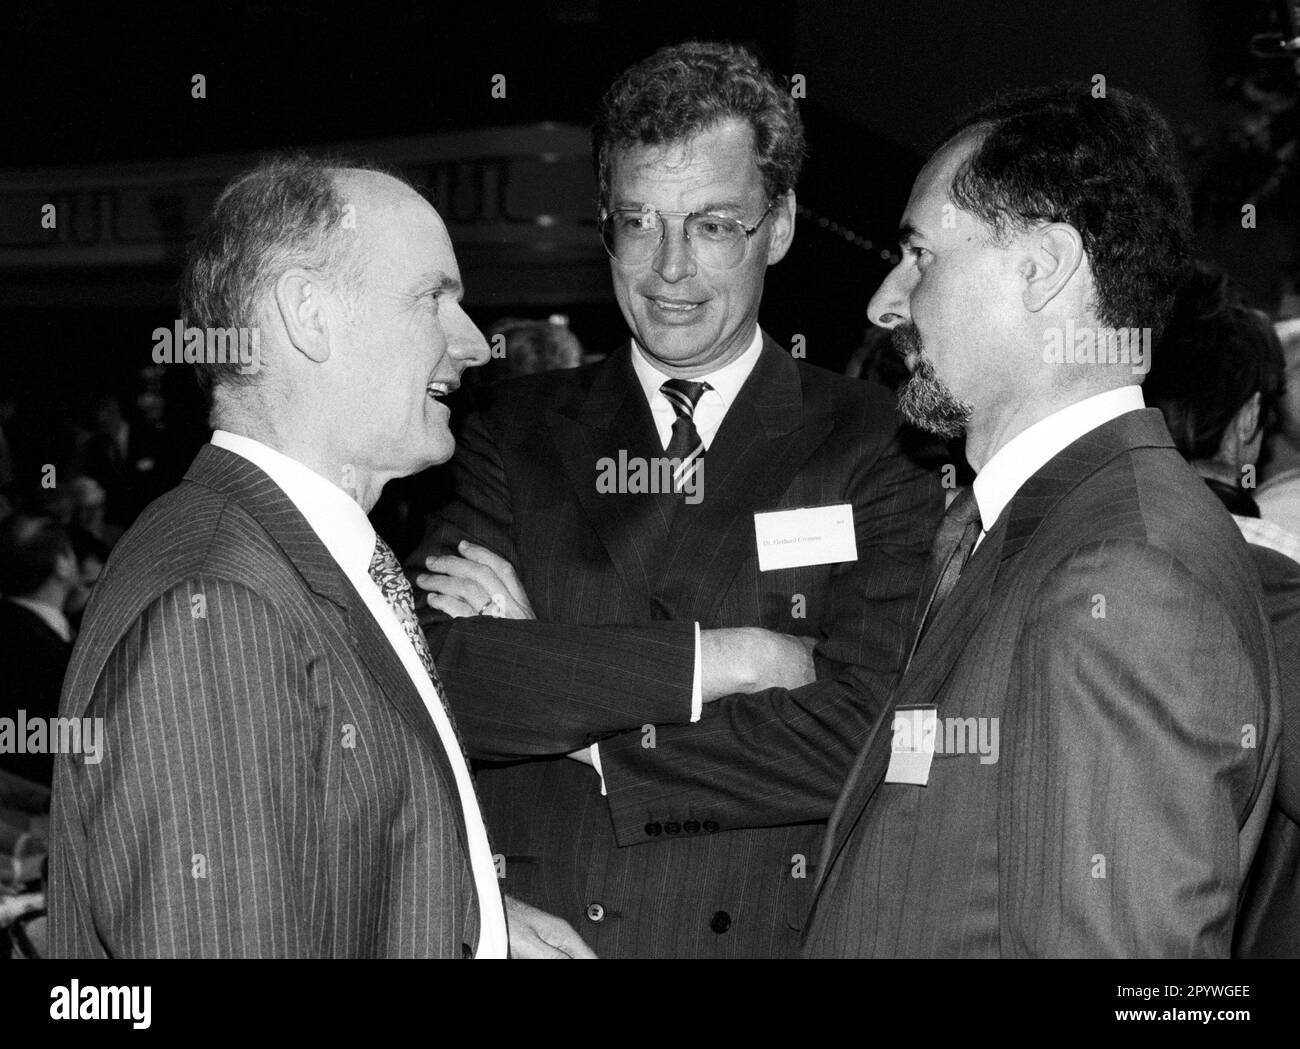 Ferdinand PIECH , Chairman of the Board of Management of Volkswagen AG , Gerhard CROMME , Chairman of the Board of Management of Fried. Krupp AG Hoesch-Krupp , and Bernd PISCHETSRIEDER , Chairman of the Board of Management of BMW AG , June 1996 [automated translation] Stock Photo